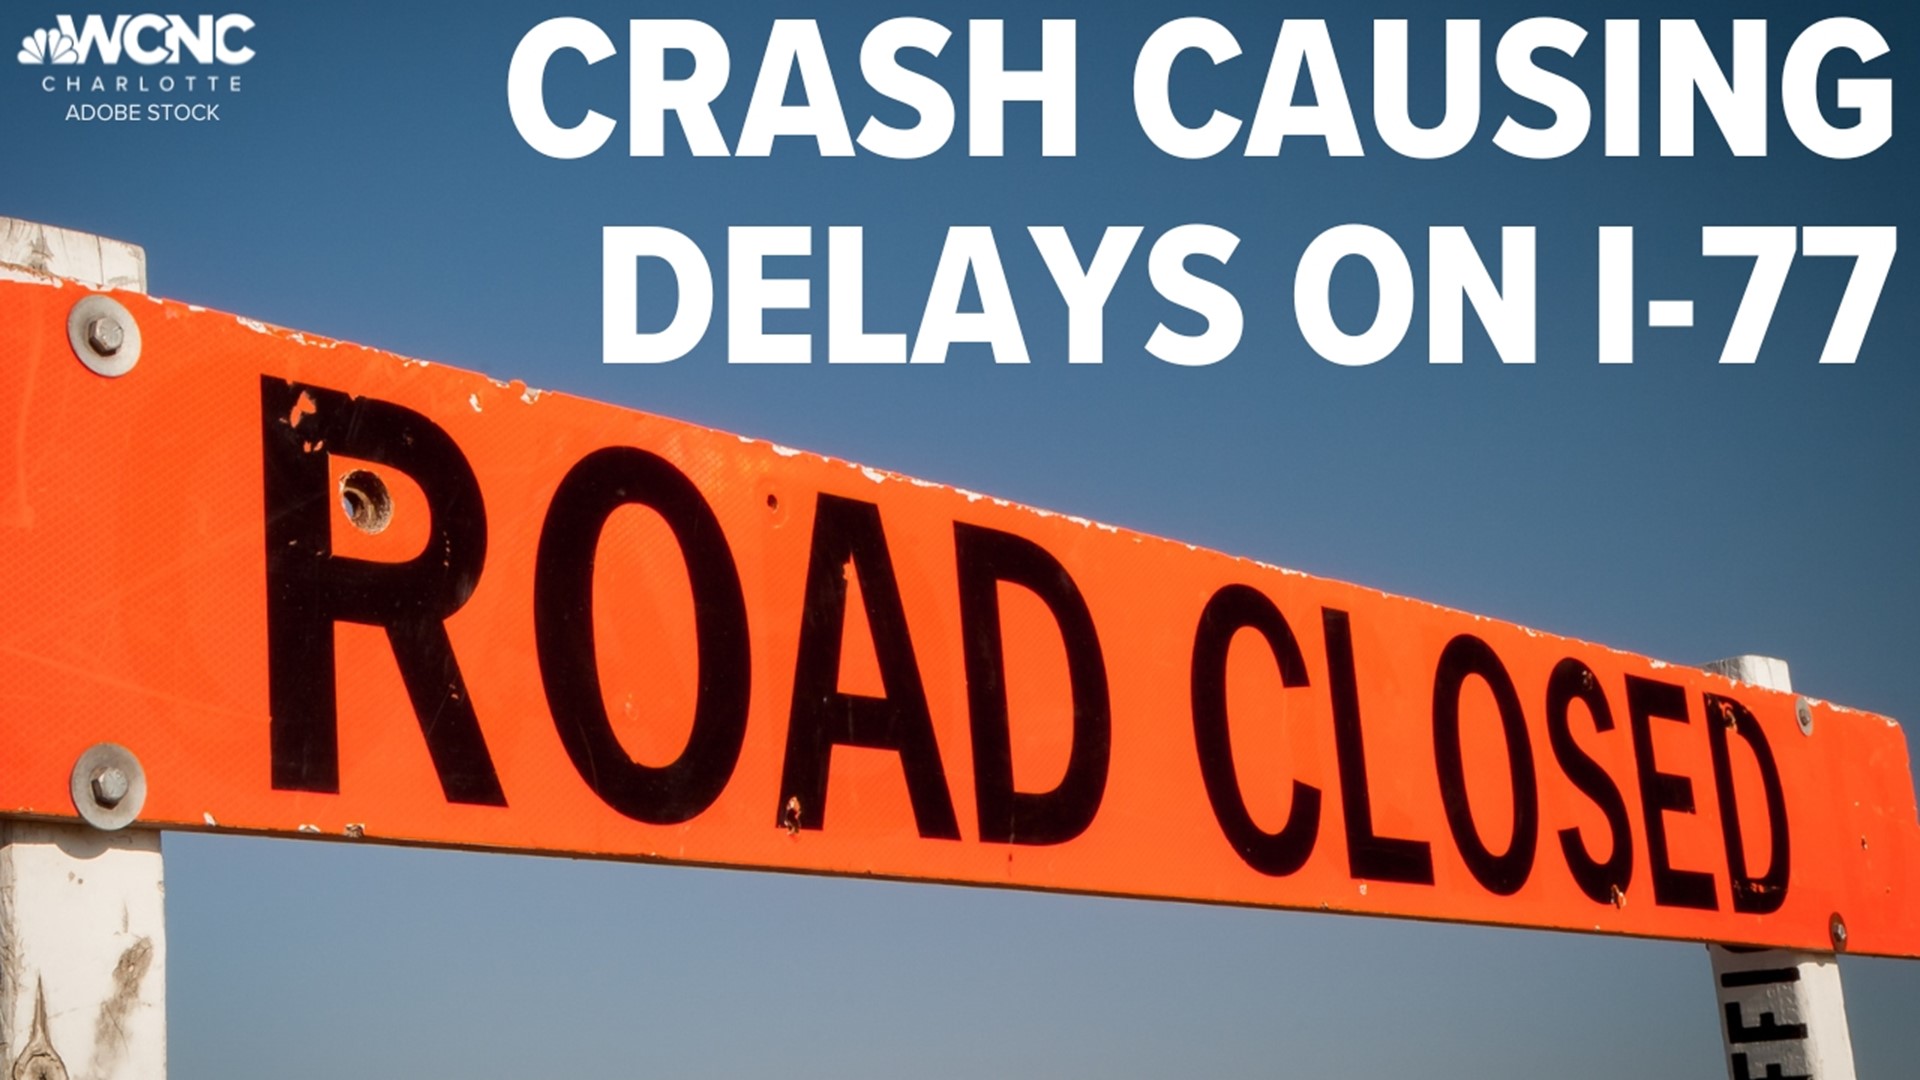 NCDOT said the crash and road closure started around 3:51 p.m. and the closure is expected to last through at least 5:51 p.m.